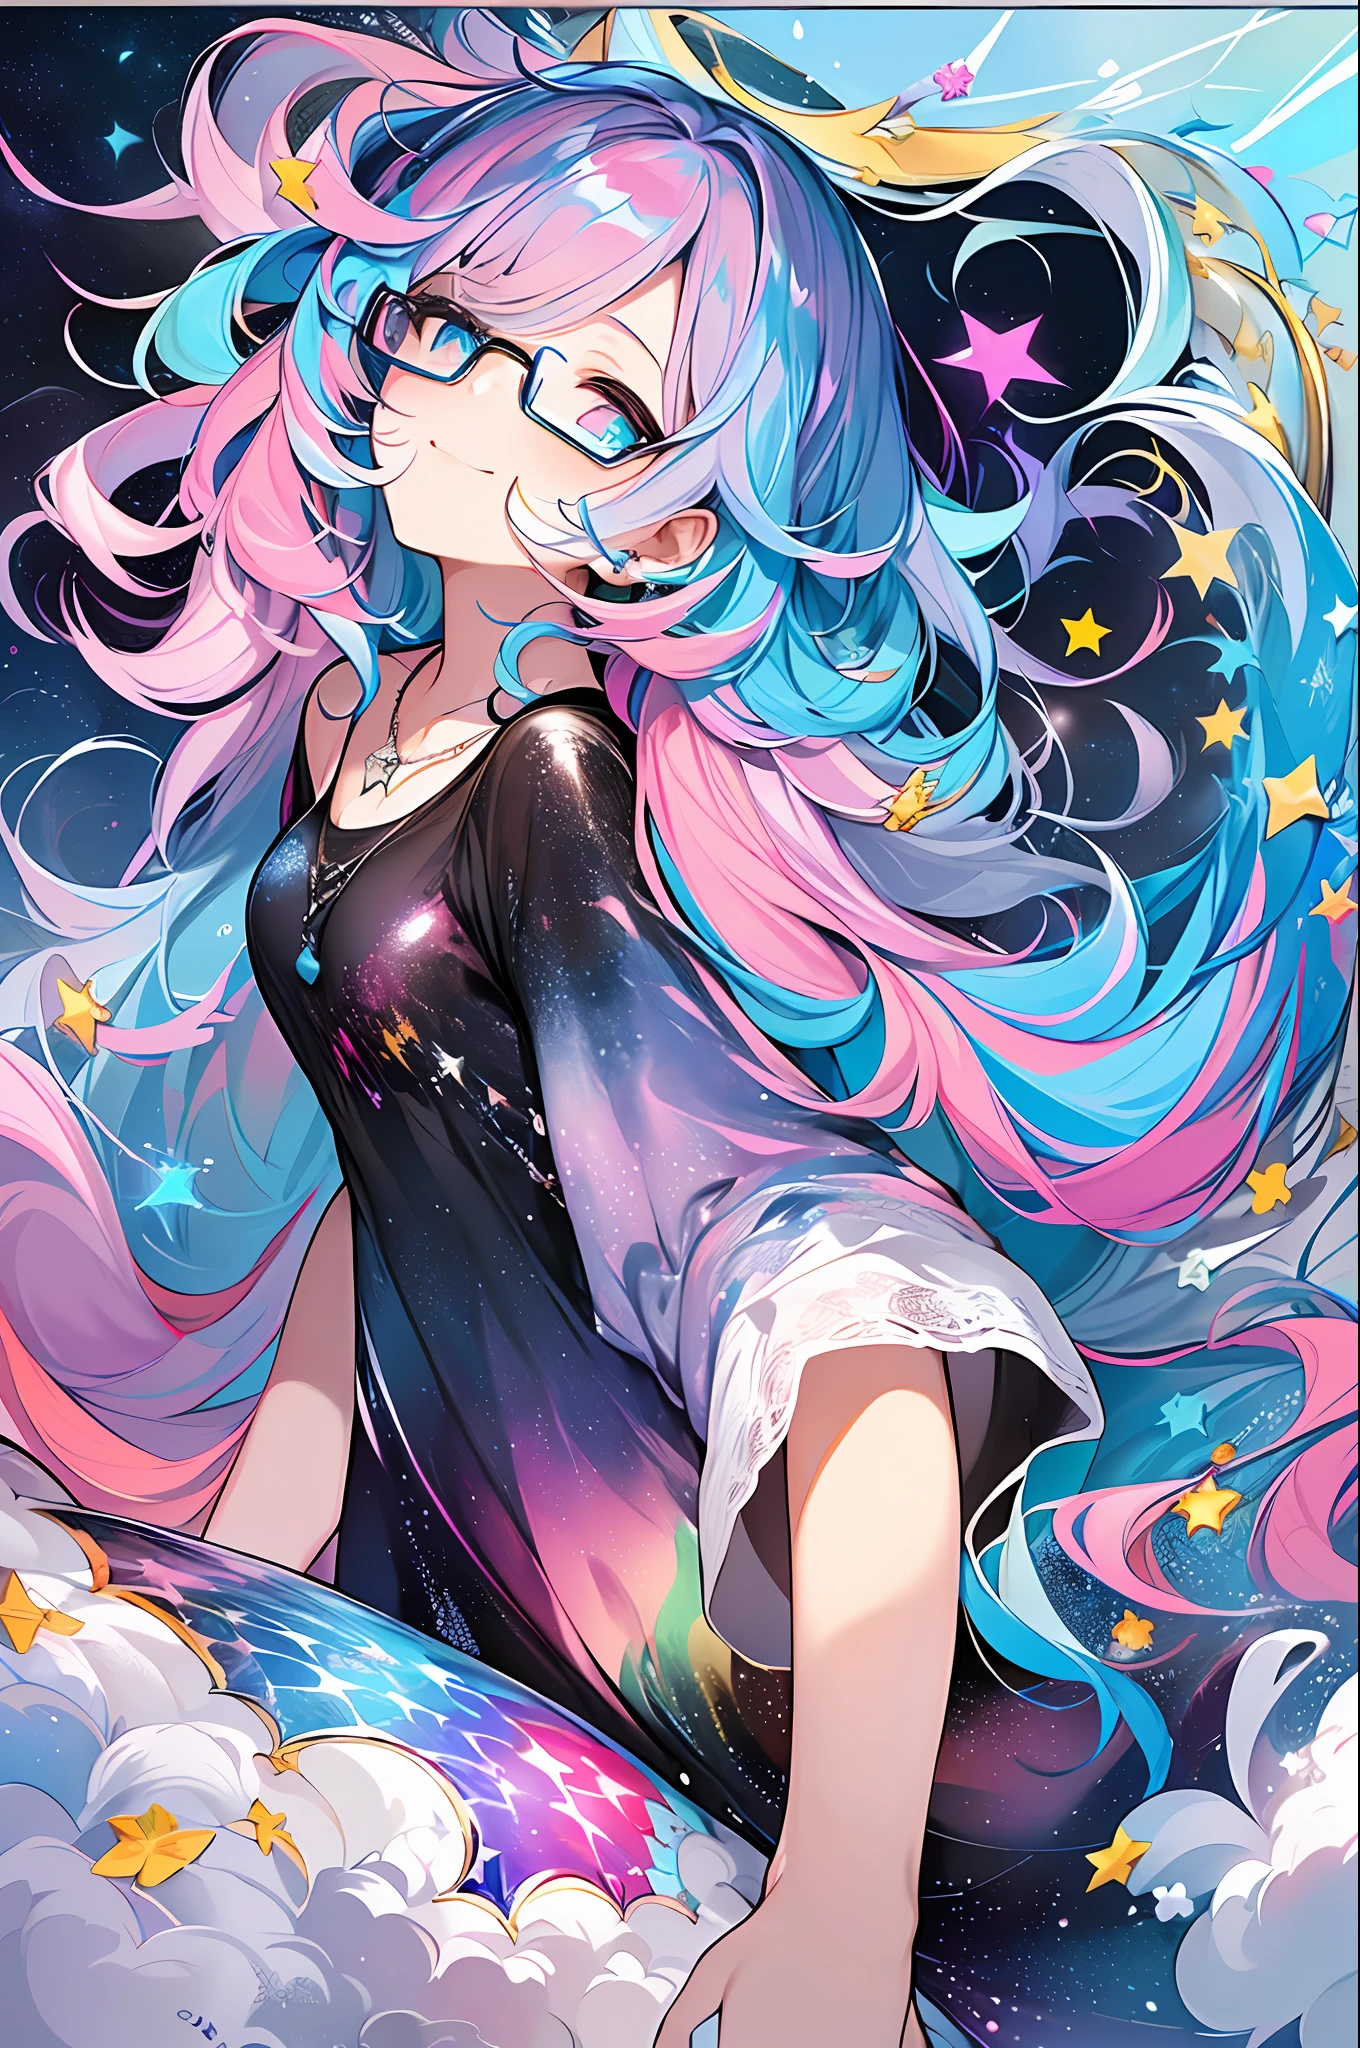 (Masterpiece, Highest Quality, Best Quality, Watercolor Art (Pendant), Official Art, Beautiful and Aesthetic, (1.3), (1 Girl: 1.3), (Fractal Art: 1.3), Full Body, Star-shaped Pupil, , Pattern, ((iridescent hair, colorful hair, half blue and half pink hair: 1.2)), Aqua, Liquid, Cloud, Colorful, Starry Night, Star, Smile, Glasses, Writing, Heterochromia, (Colorful: 1.5), galaxy, looking up at the stars, (beast ear)